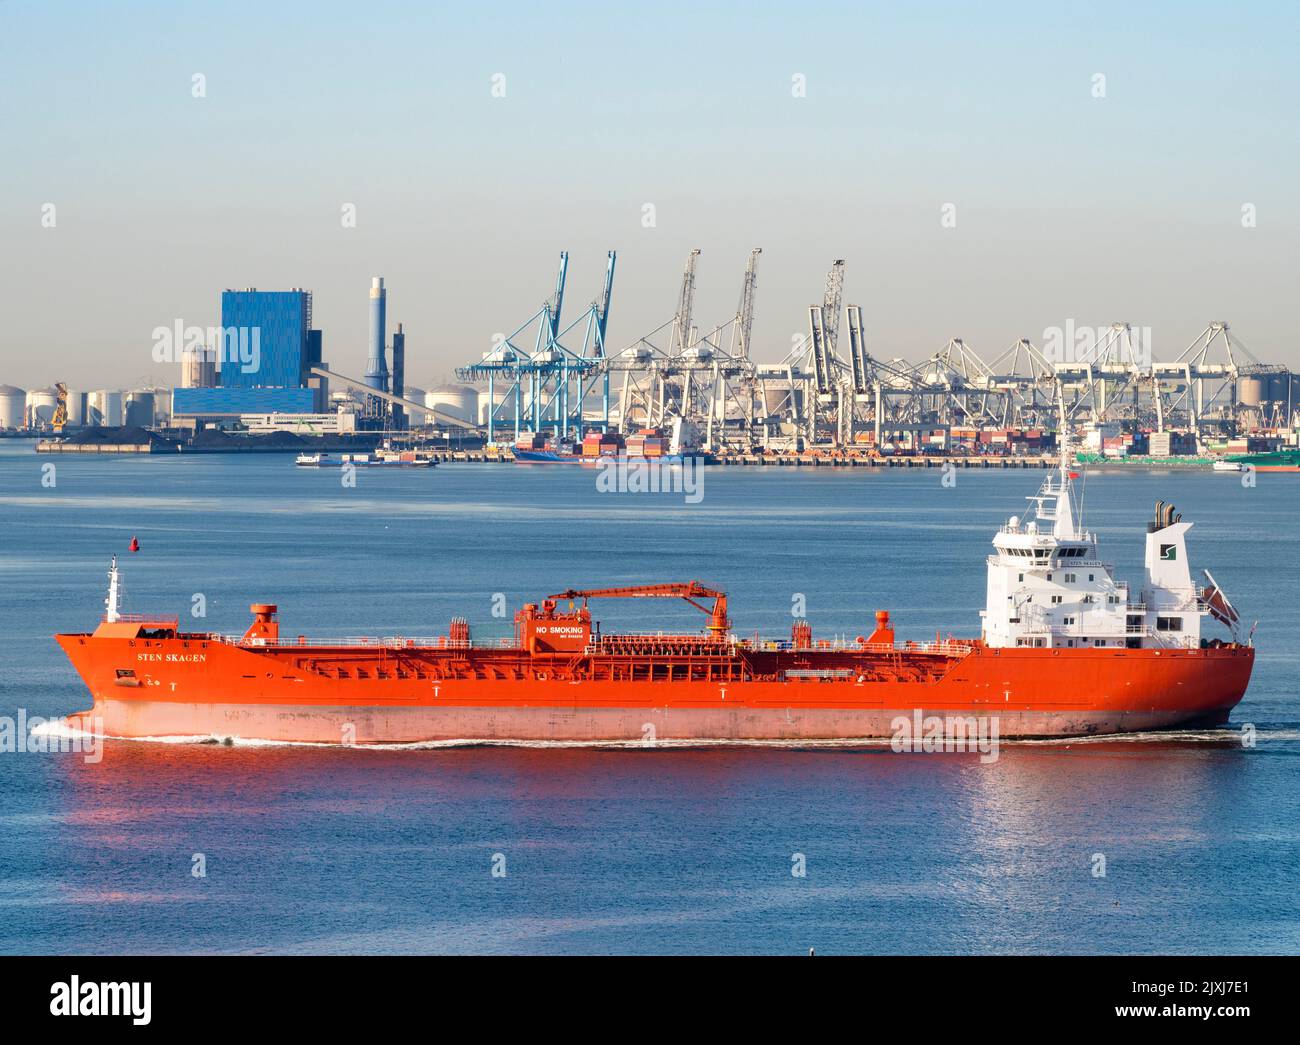 The Port of Rotterdam is the largest seaport in Europe, and the world's largest outside Asia Its scale is simply mind boggling, covering 105 square ki Stock Photo